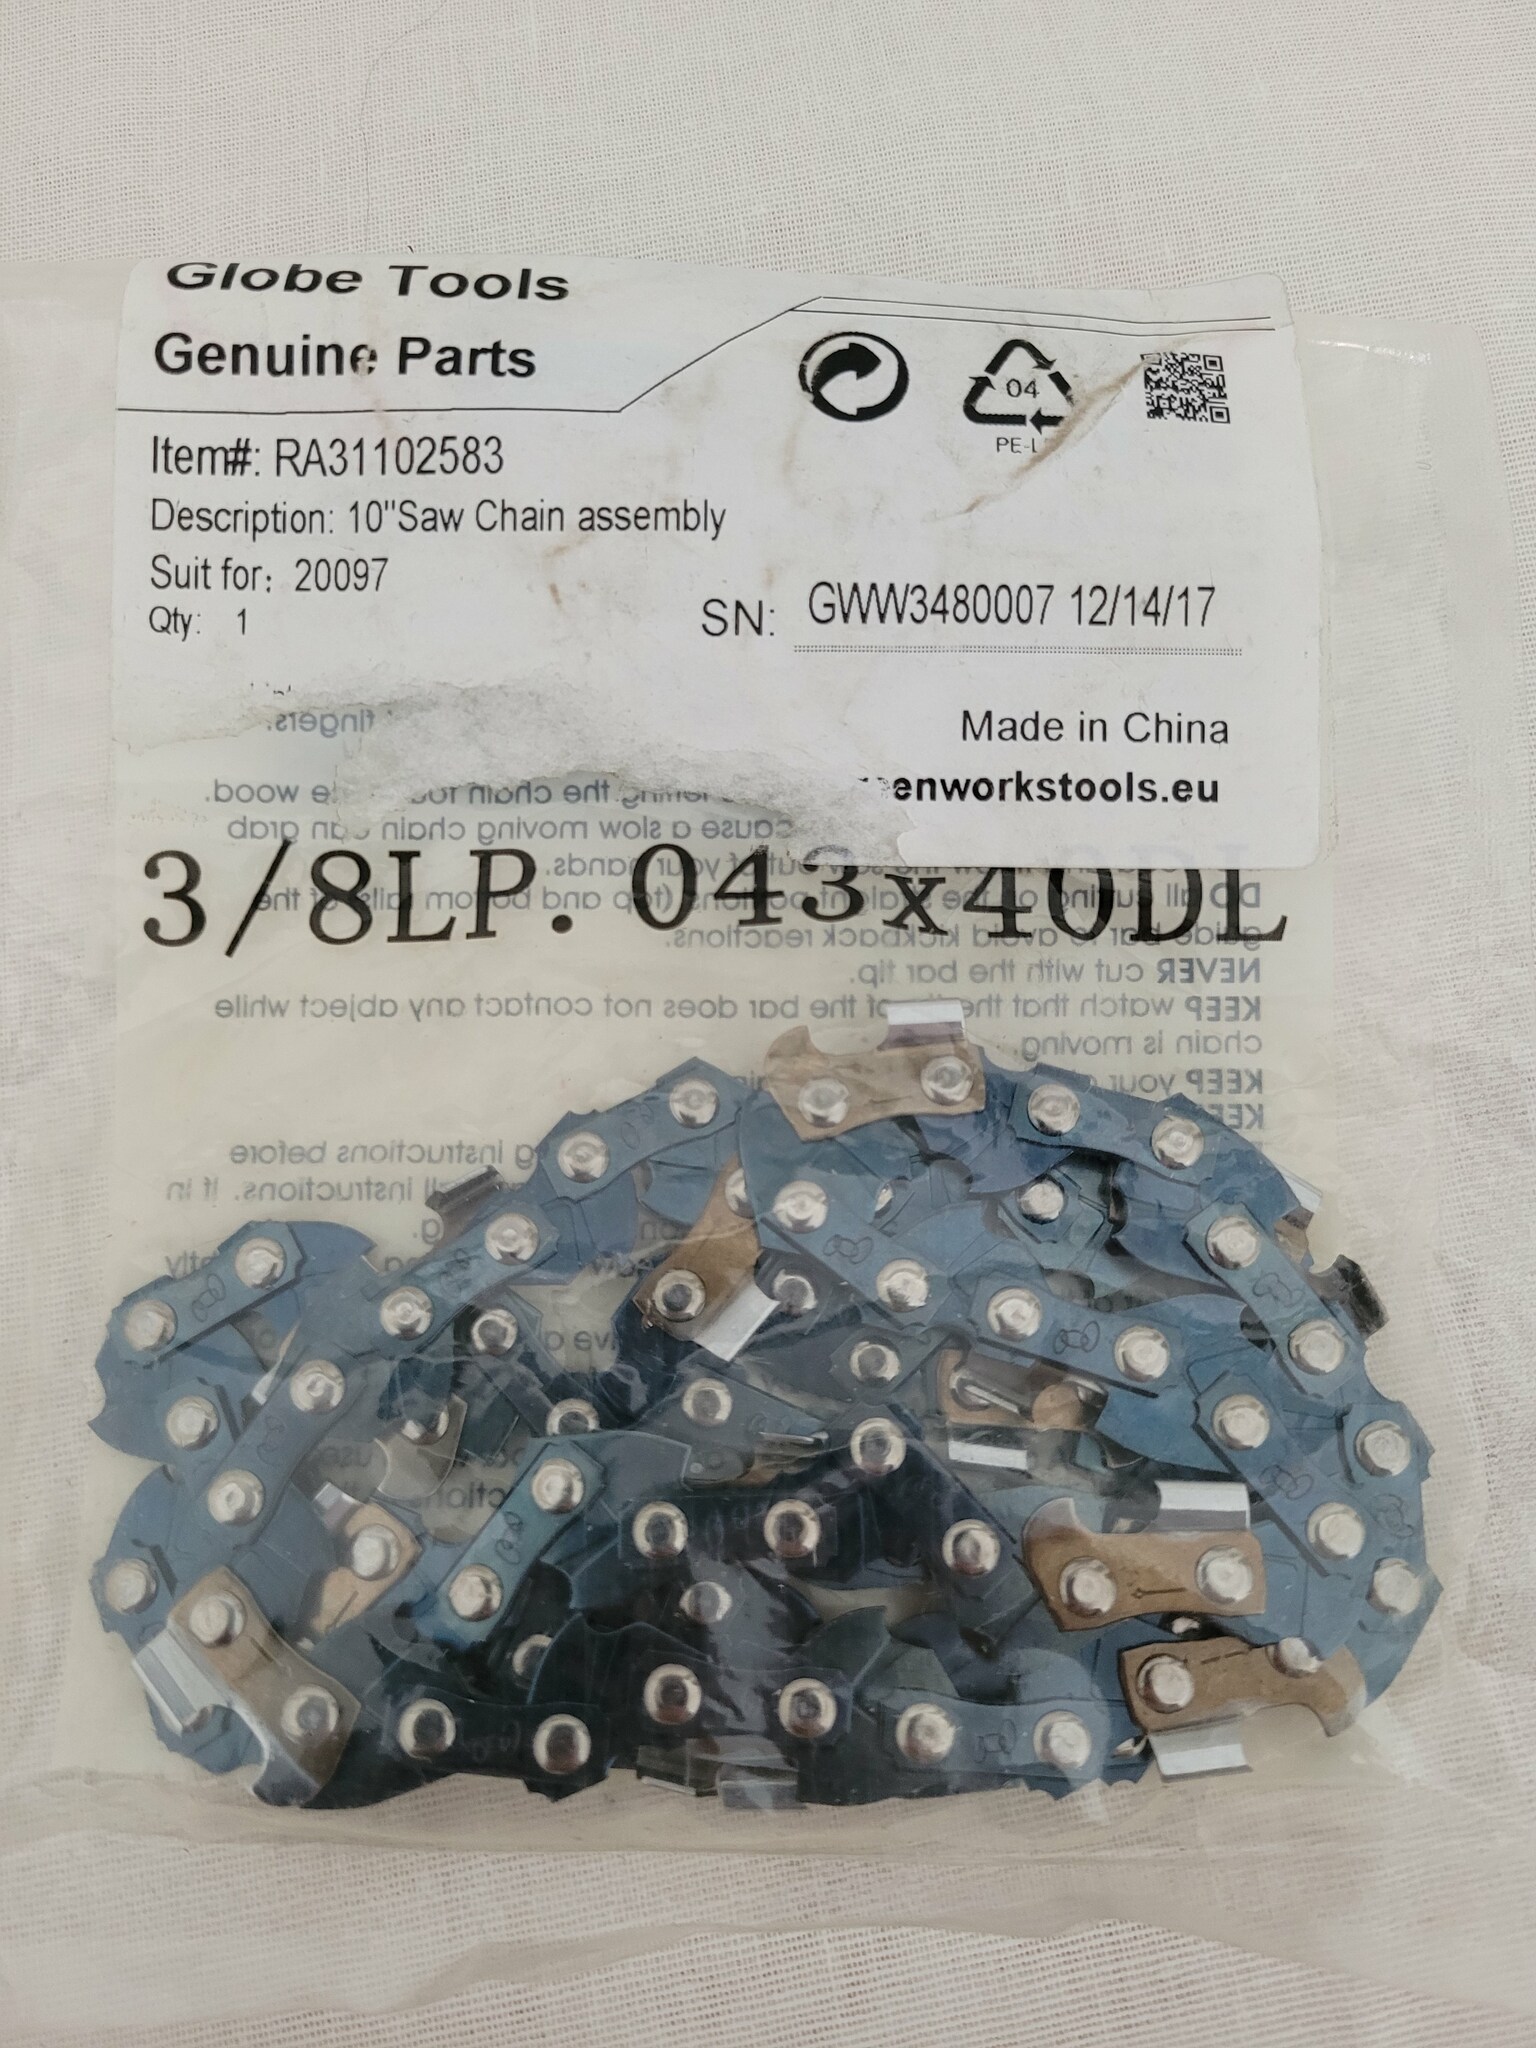 Greenworks 10"Saw Chain assembly RA31102583